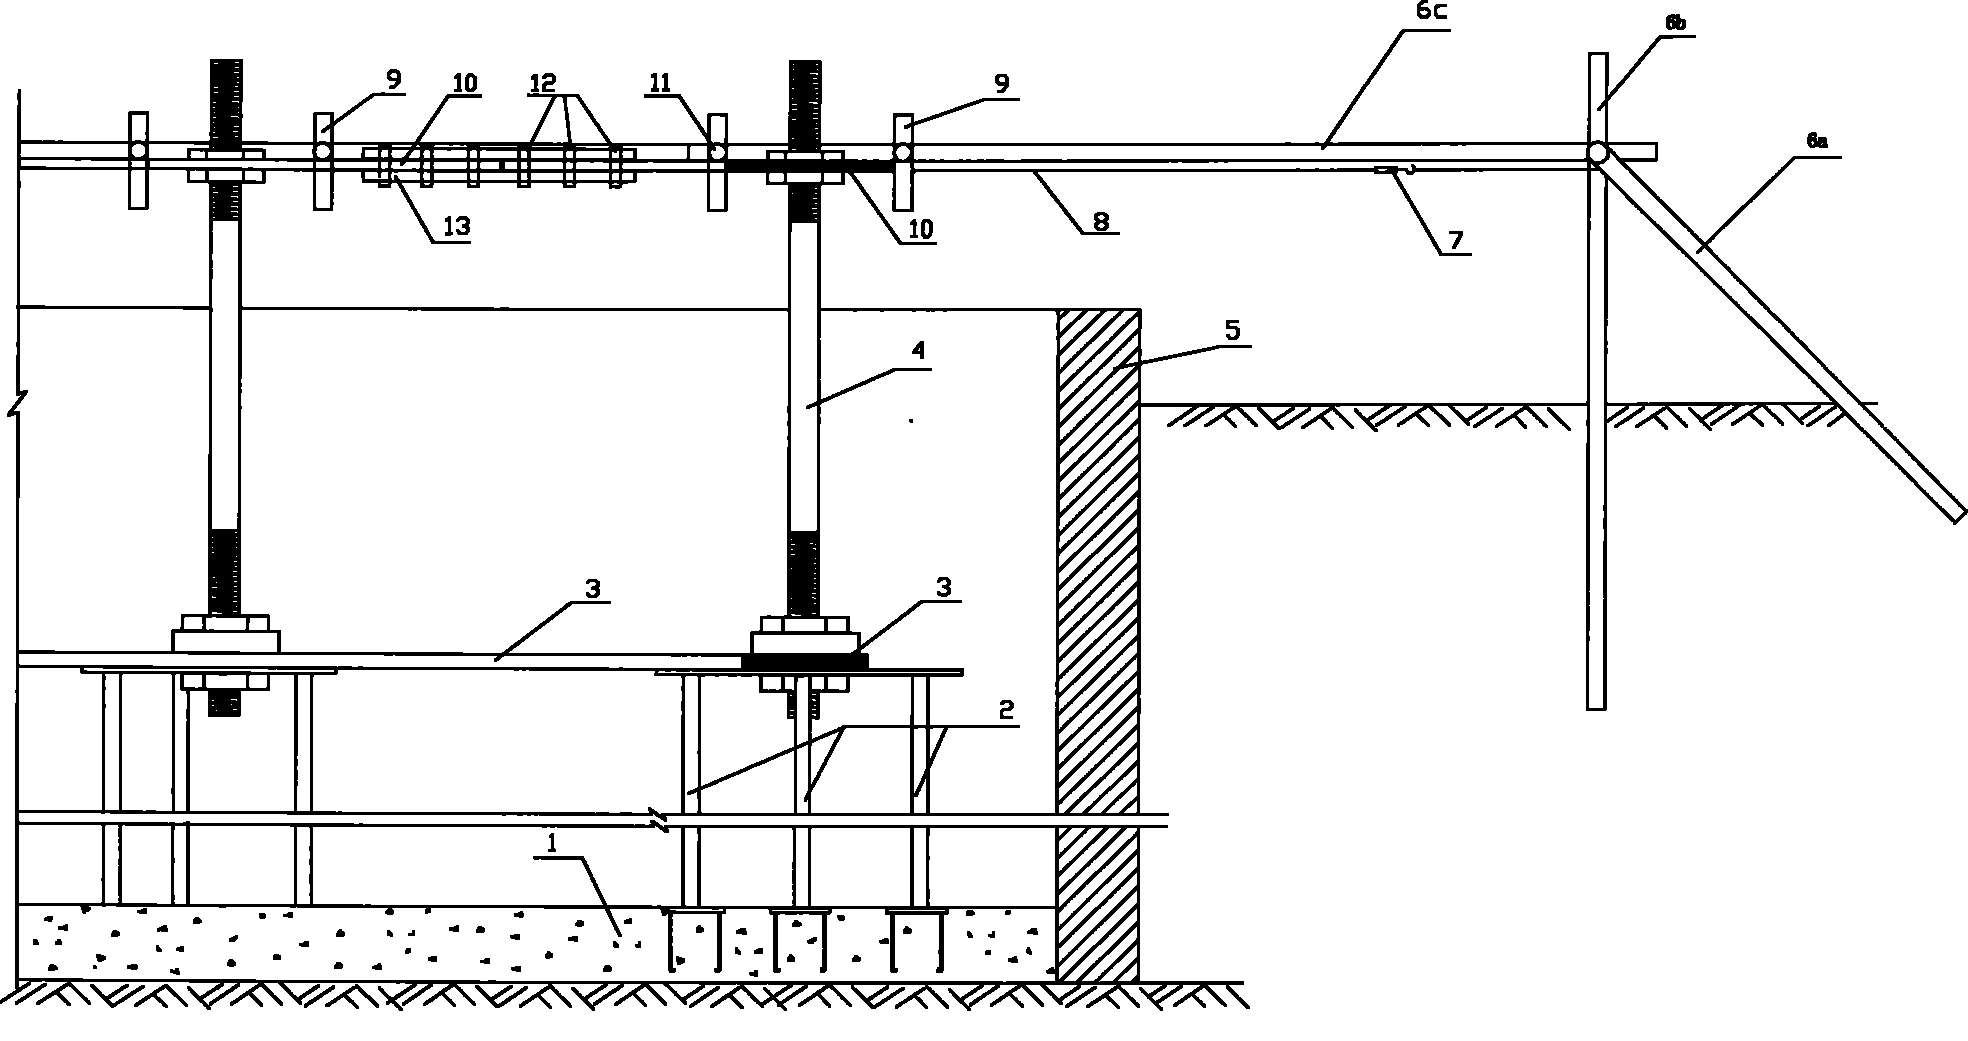 Integral built-in process for groups of anchor bolts